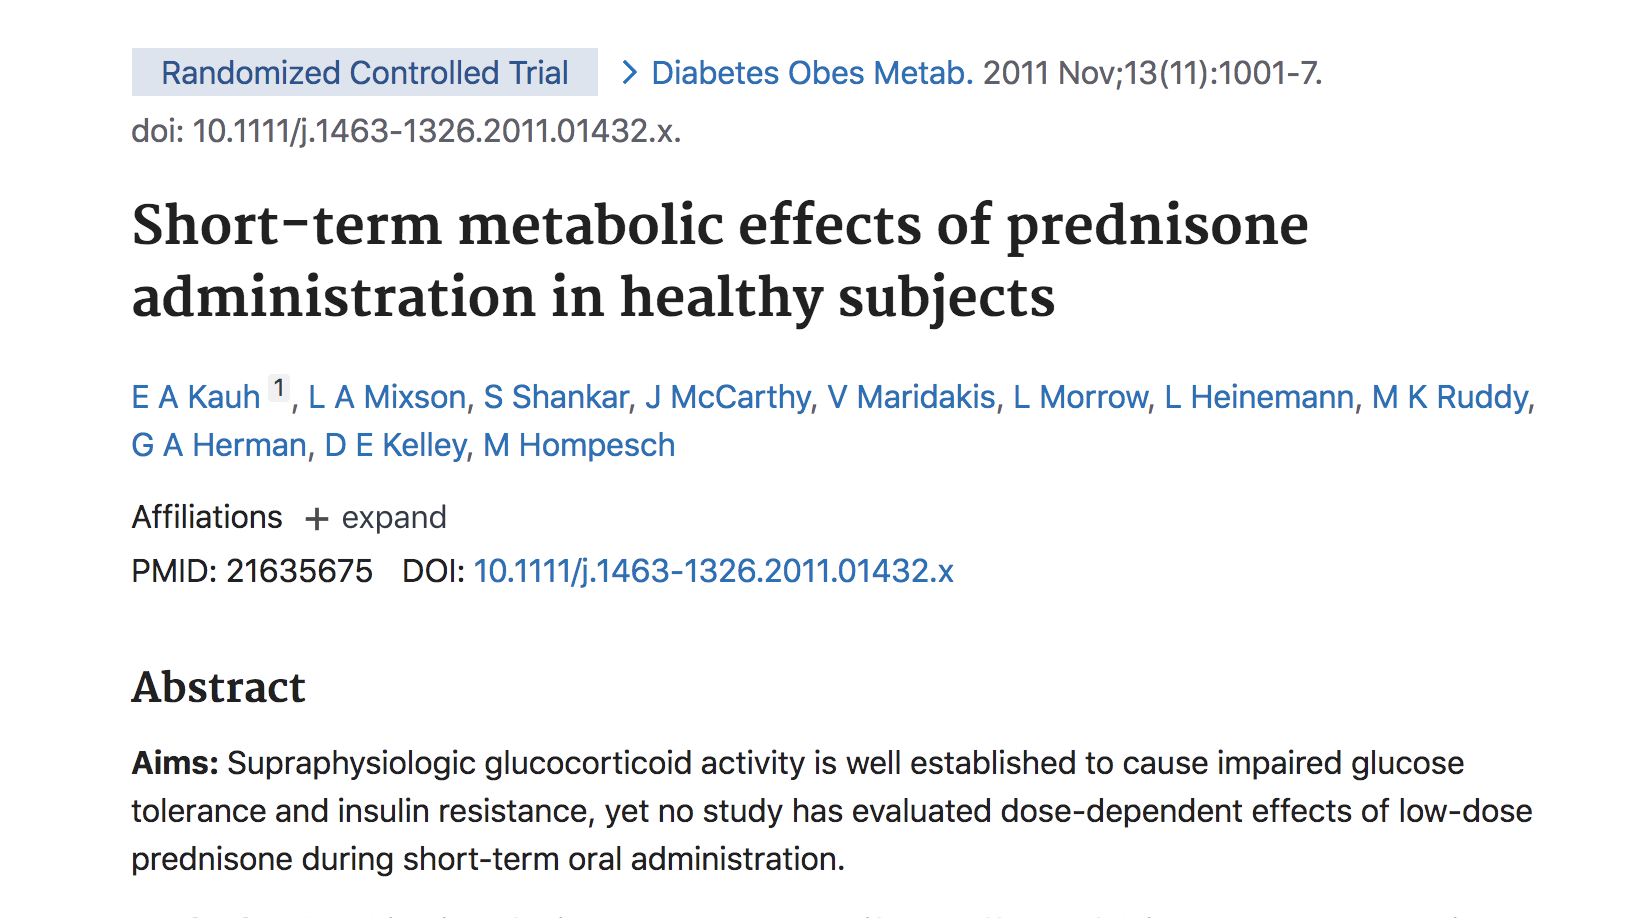 image of Short-term metabolic effects of prednisone administration in healthy subjects